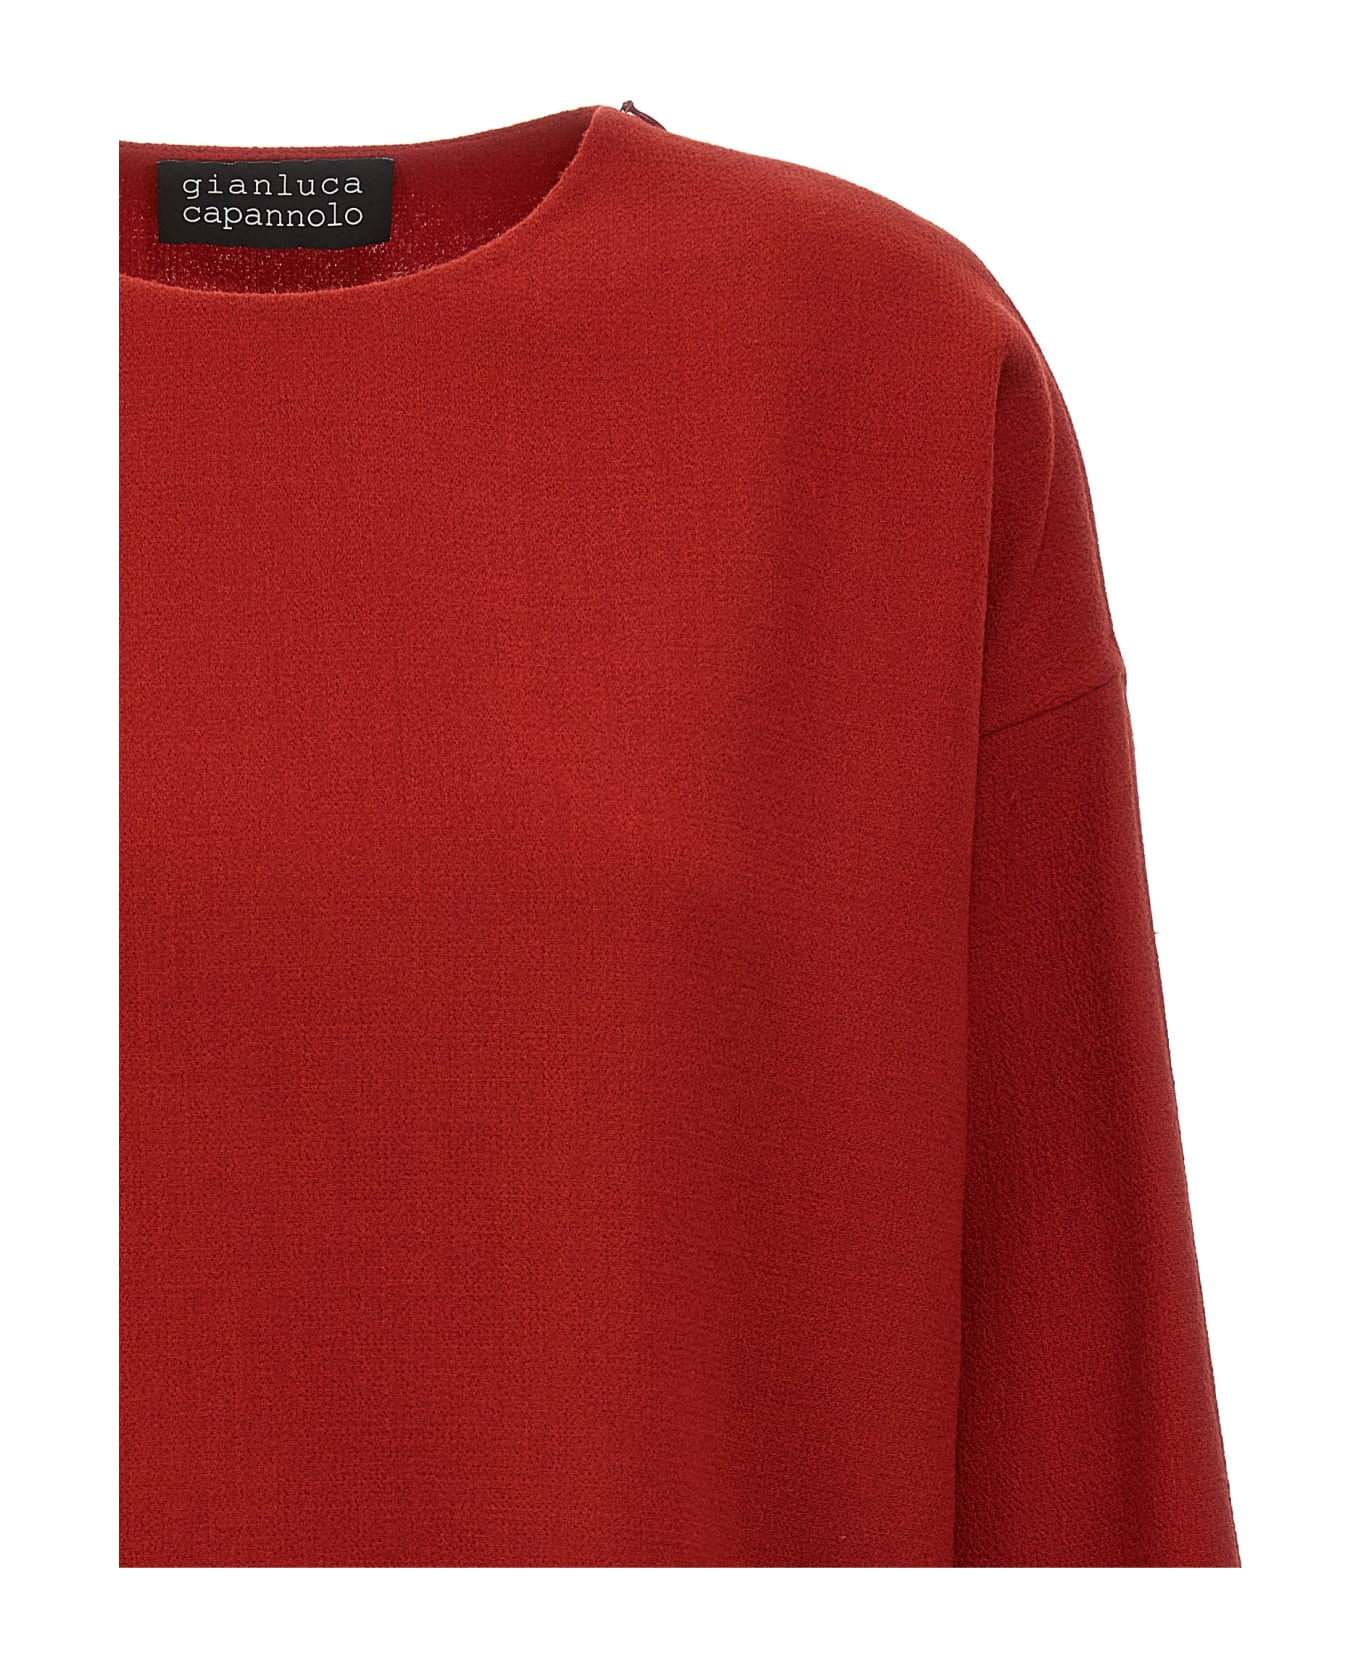 Gianluca Capannolo 'bettina' Top - Red トップス